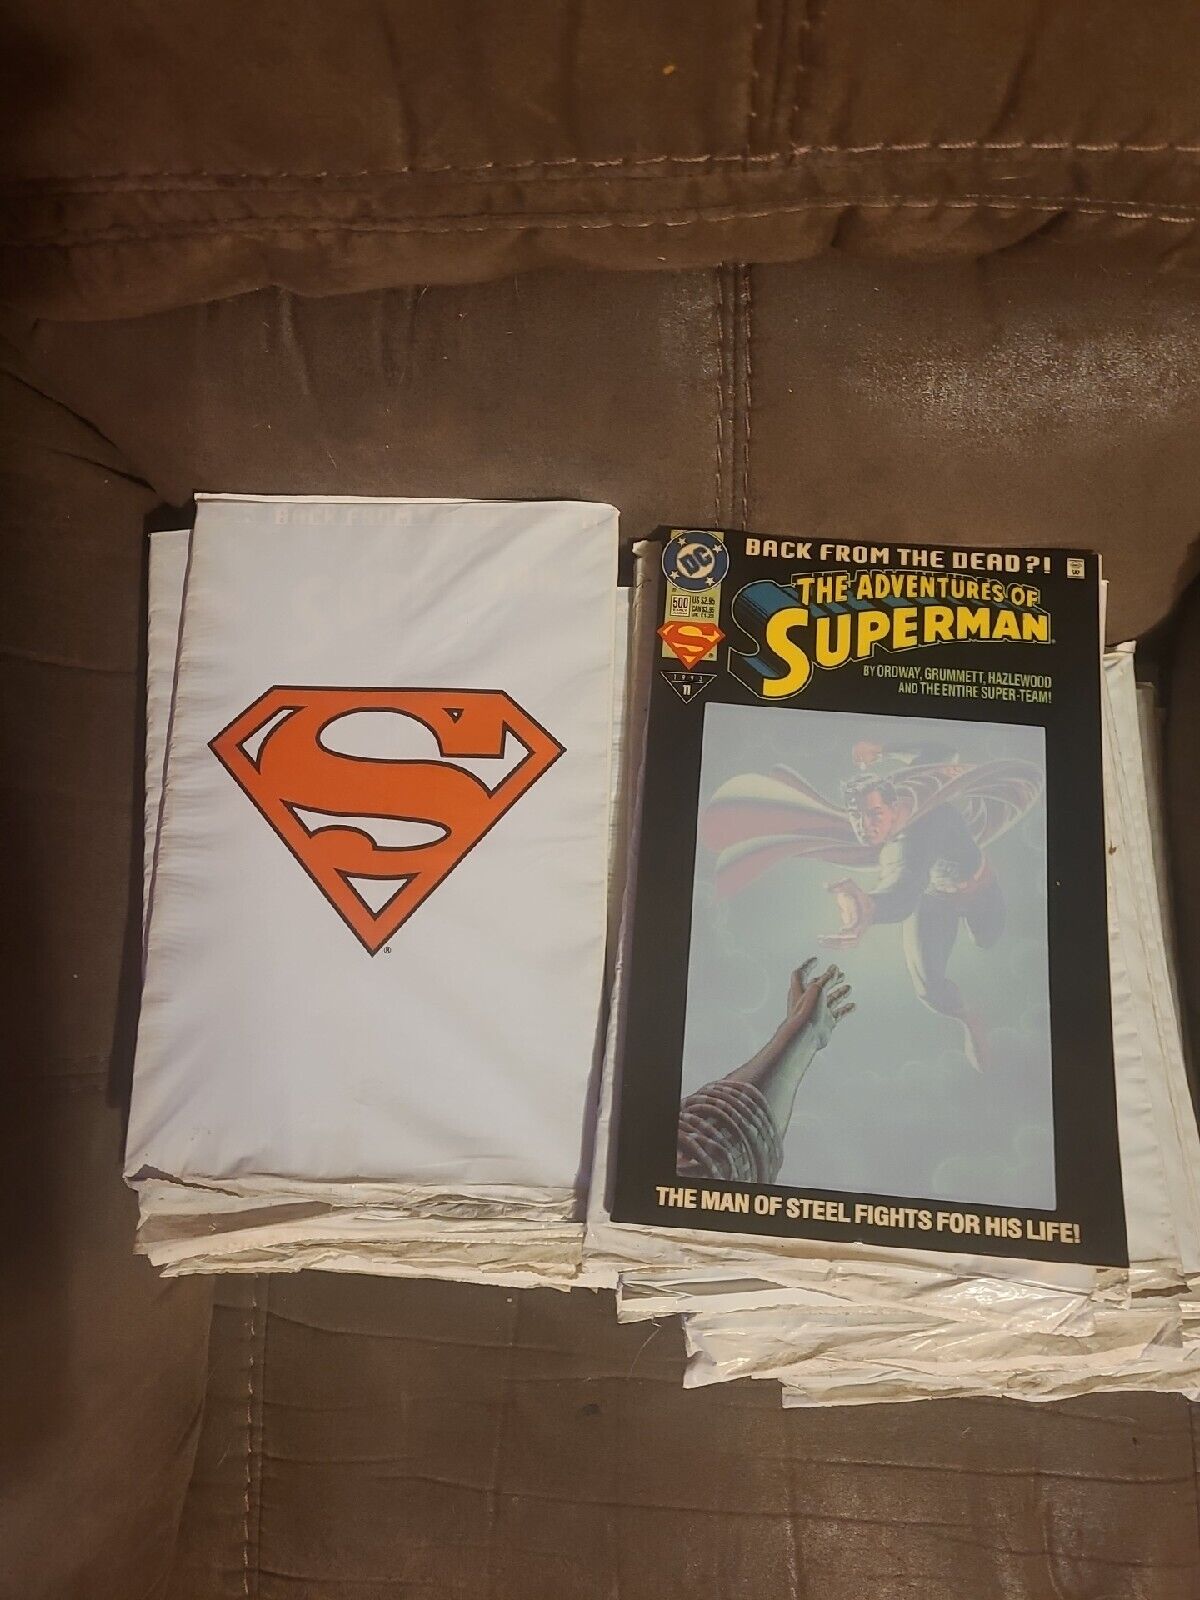 60 Superman Return From the Dead #500 White Bag Sealed DC Comics 1993.